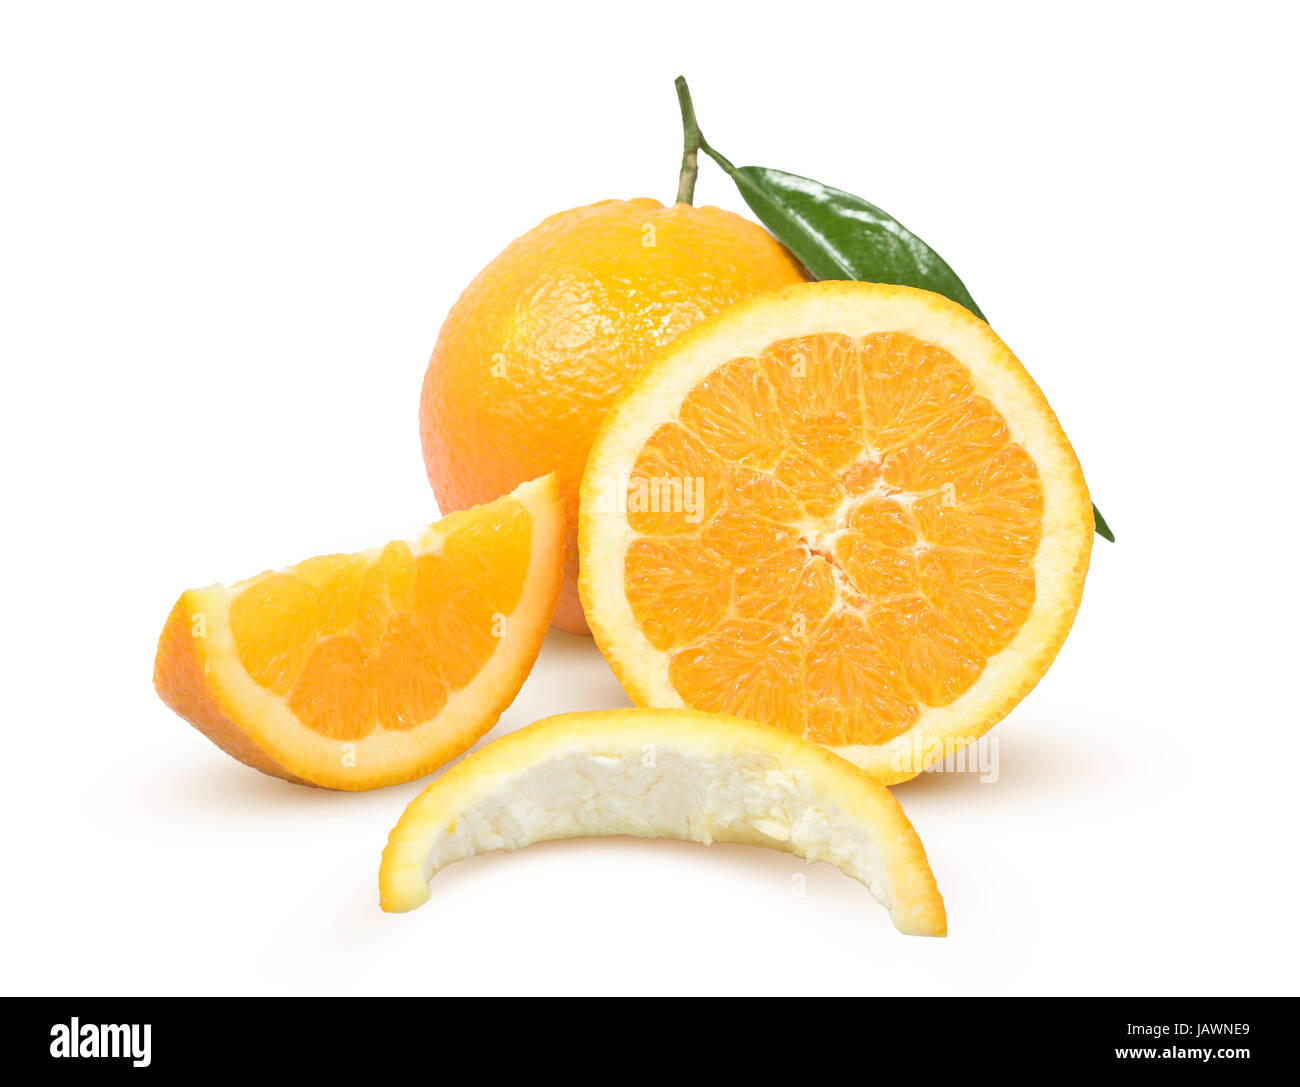 Ripe orange with a green leaf on a white background Stock Photo